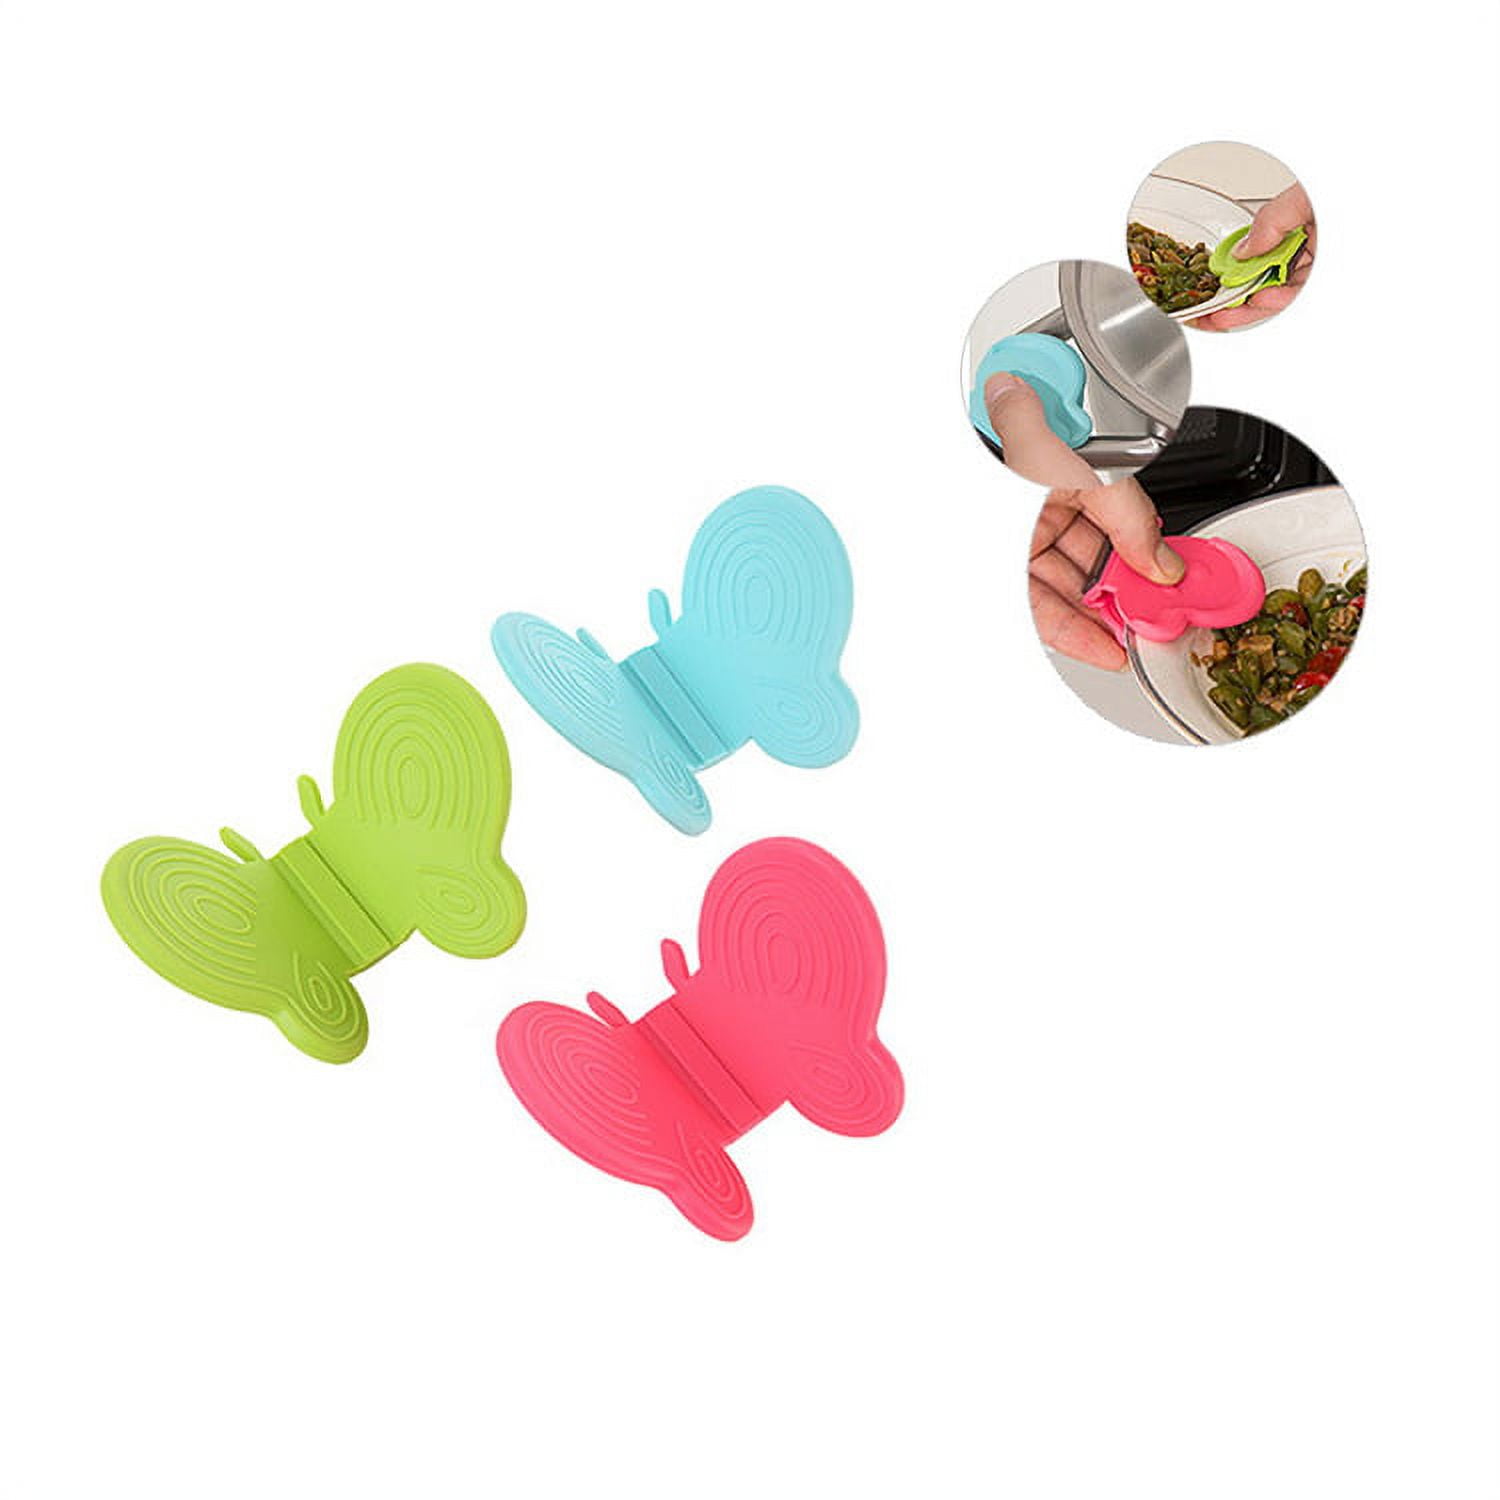 Grofry 2pcs Pot Holders Anti-scald Magnetic Silicone Multifunctional Butterfly Shape Fridge Magnets Oven Mitts for Gifts, Size: 11.5, Other